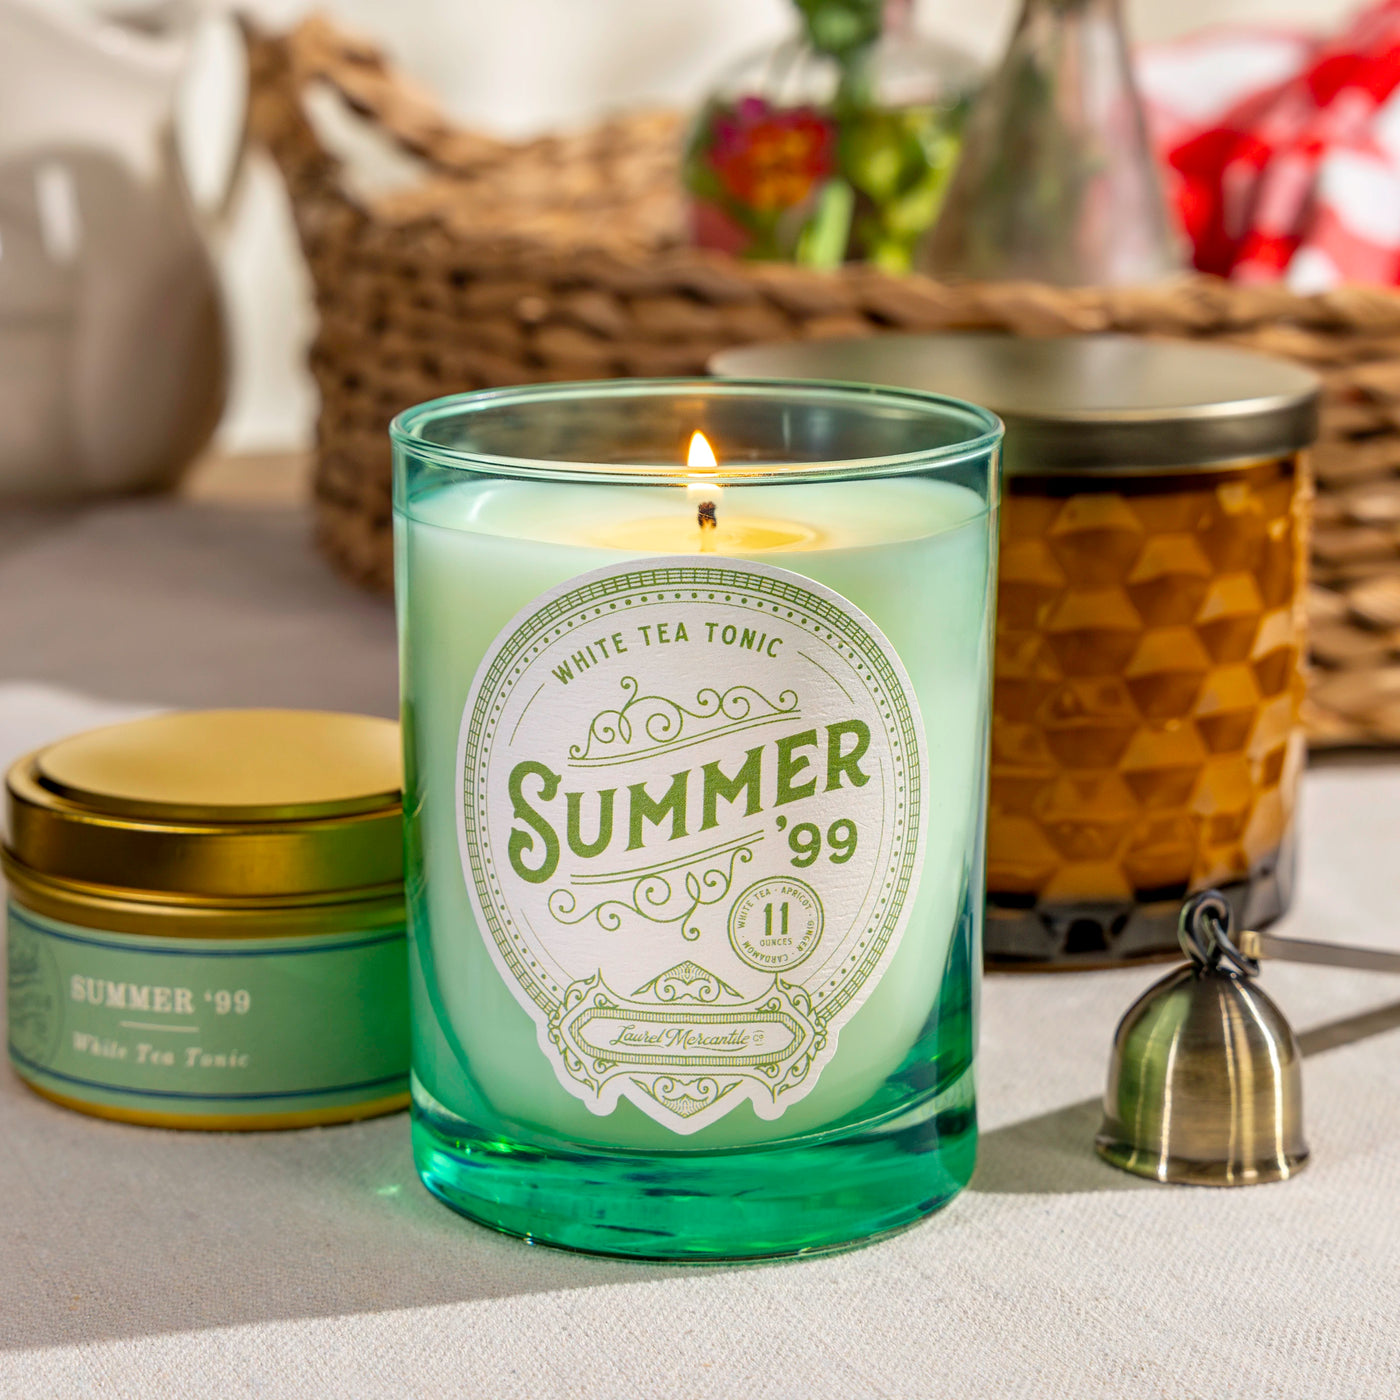 Summer '99 13 oz. Candle